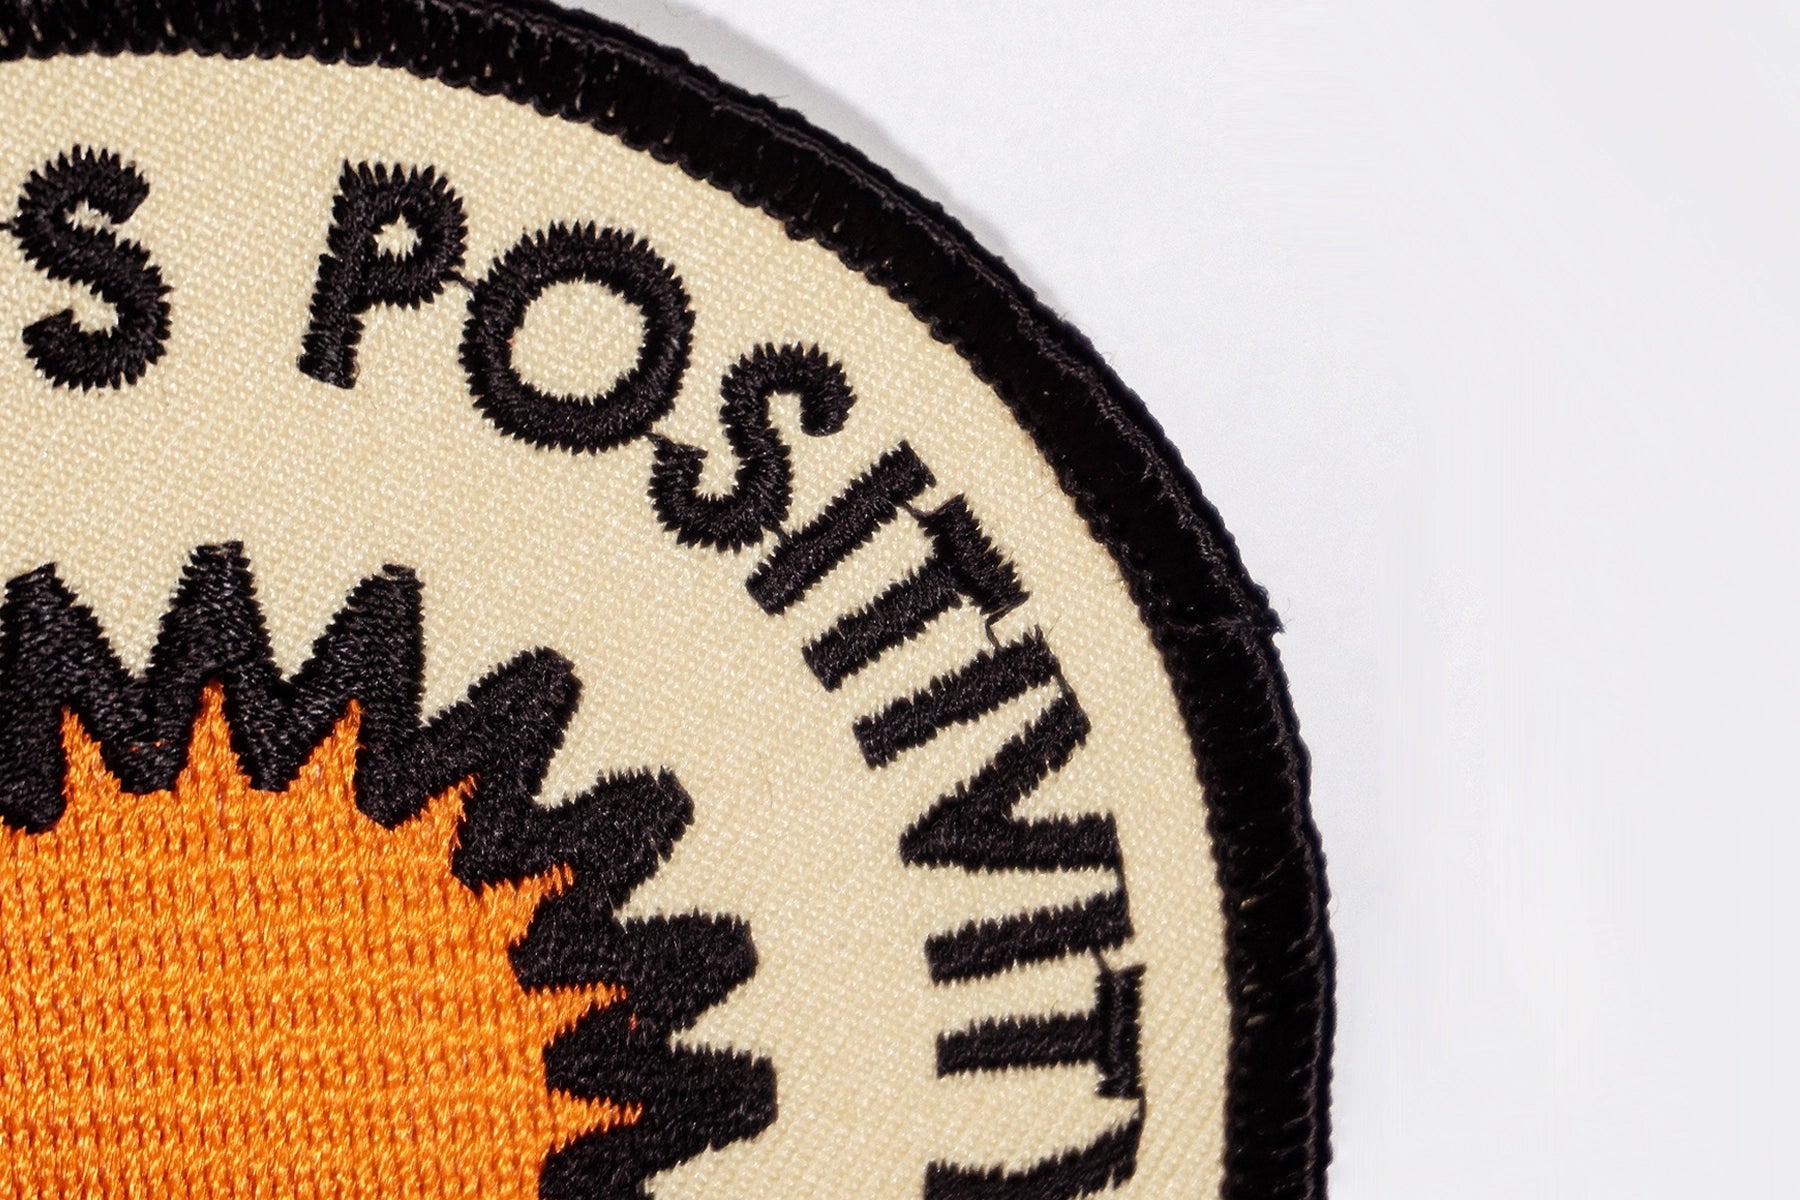 Positivity Embroidered Patch